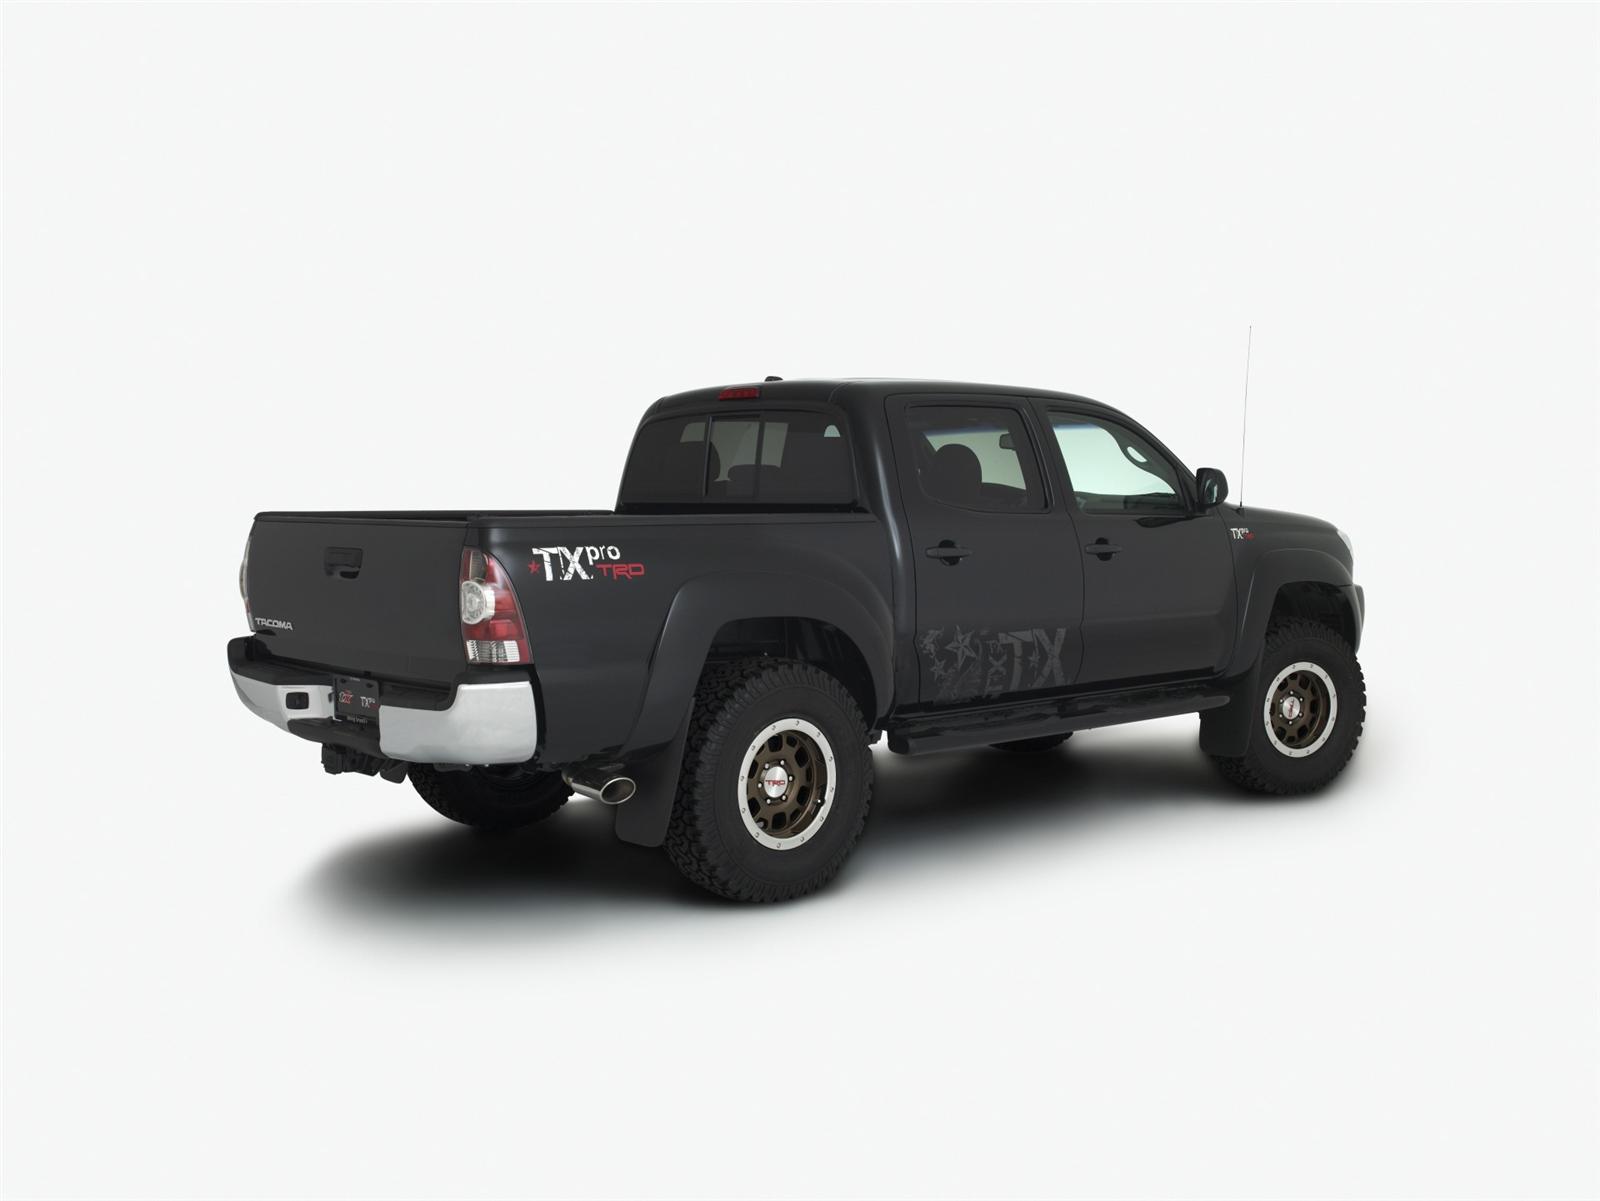 2009 Toyota Tacoma TX Package Concept